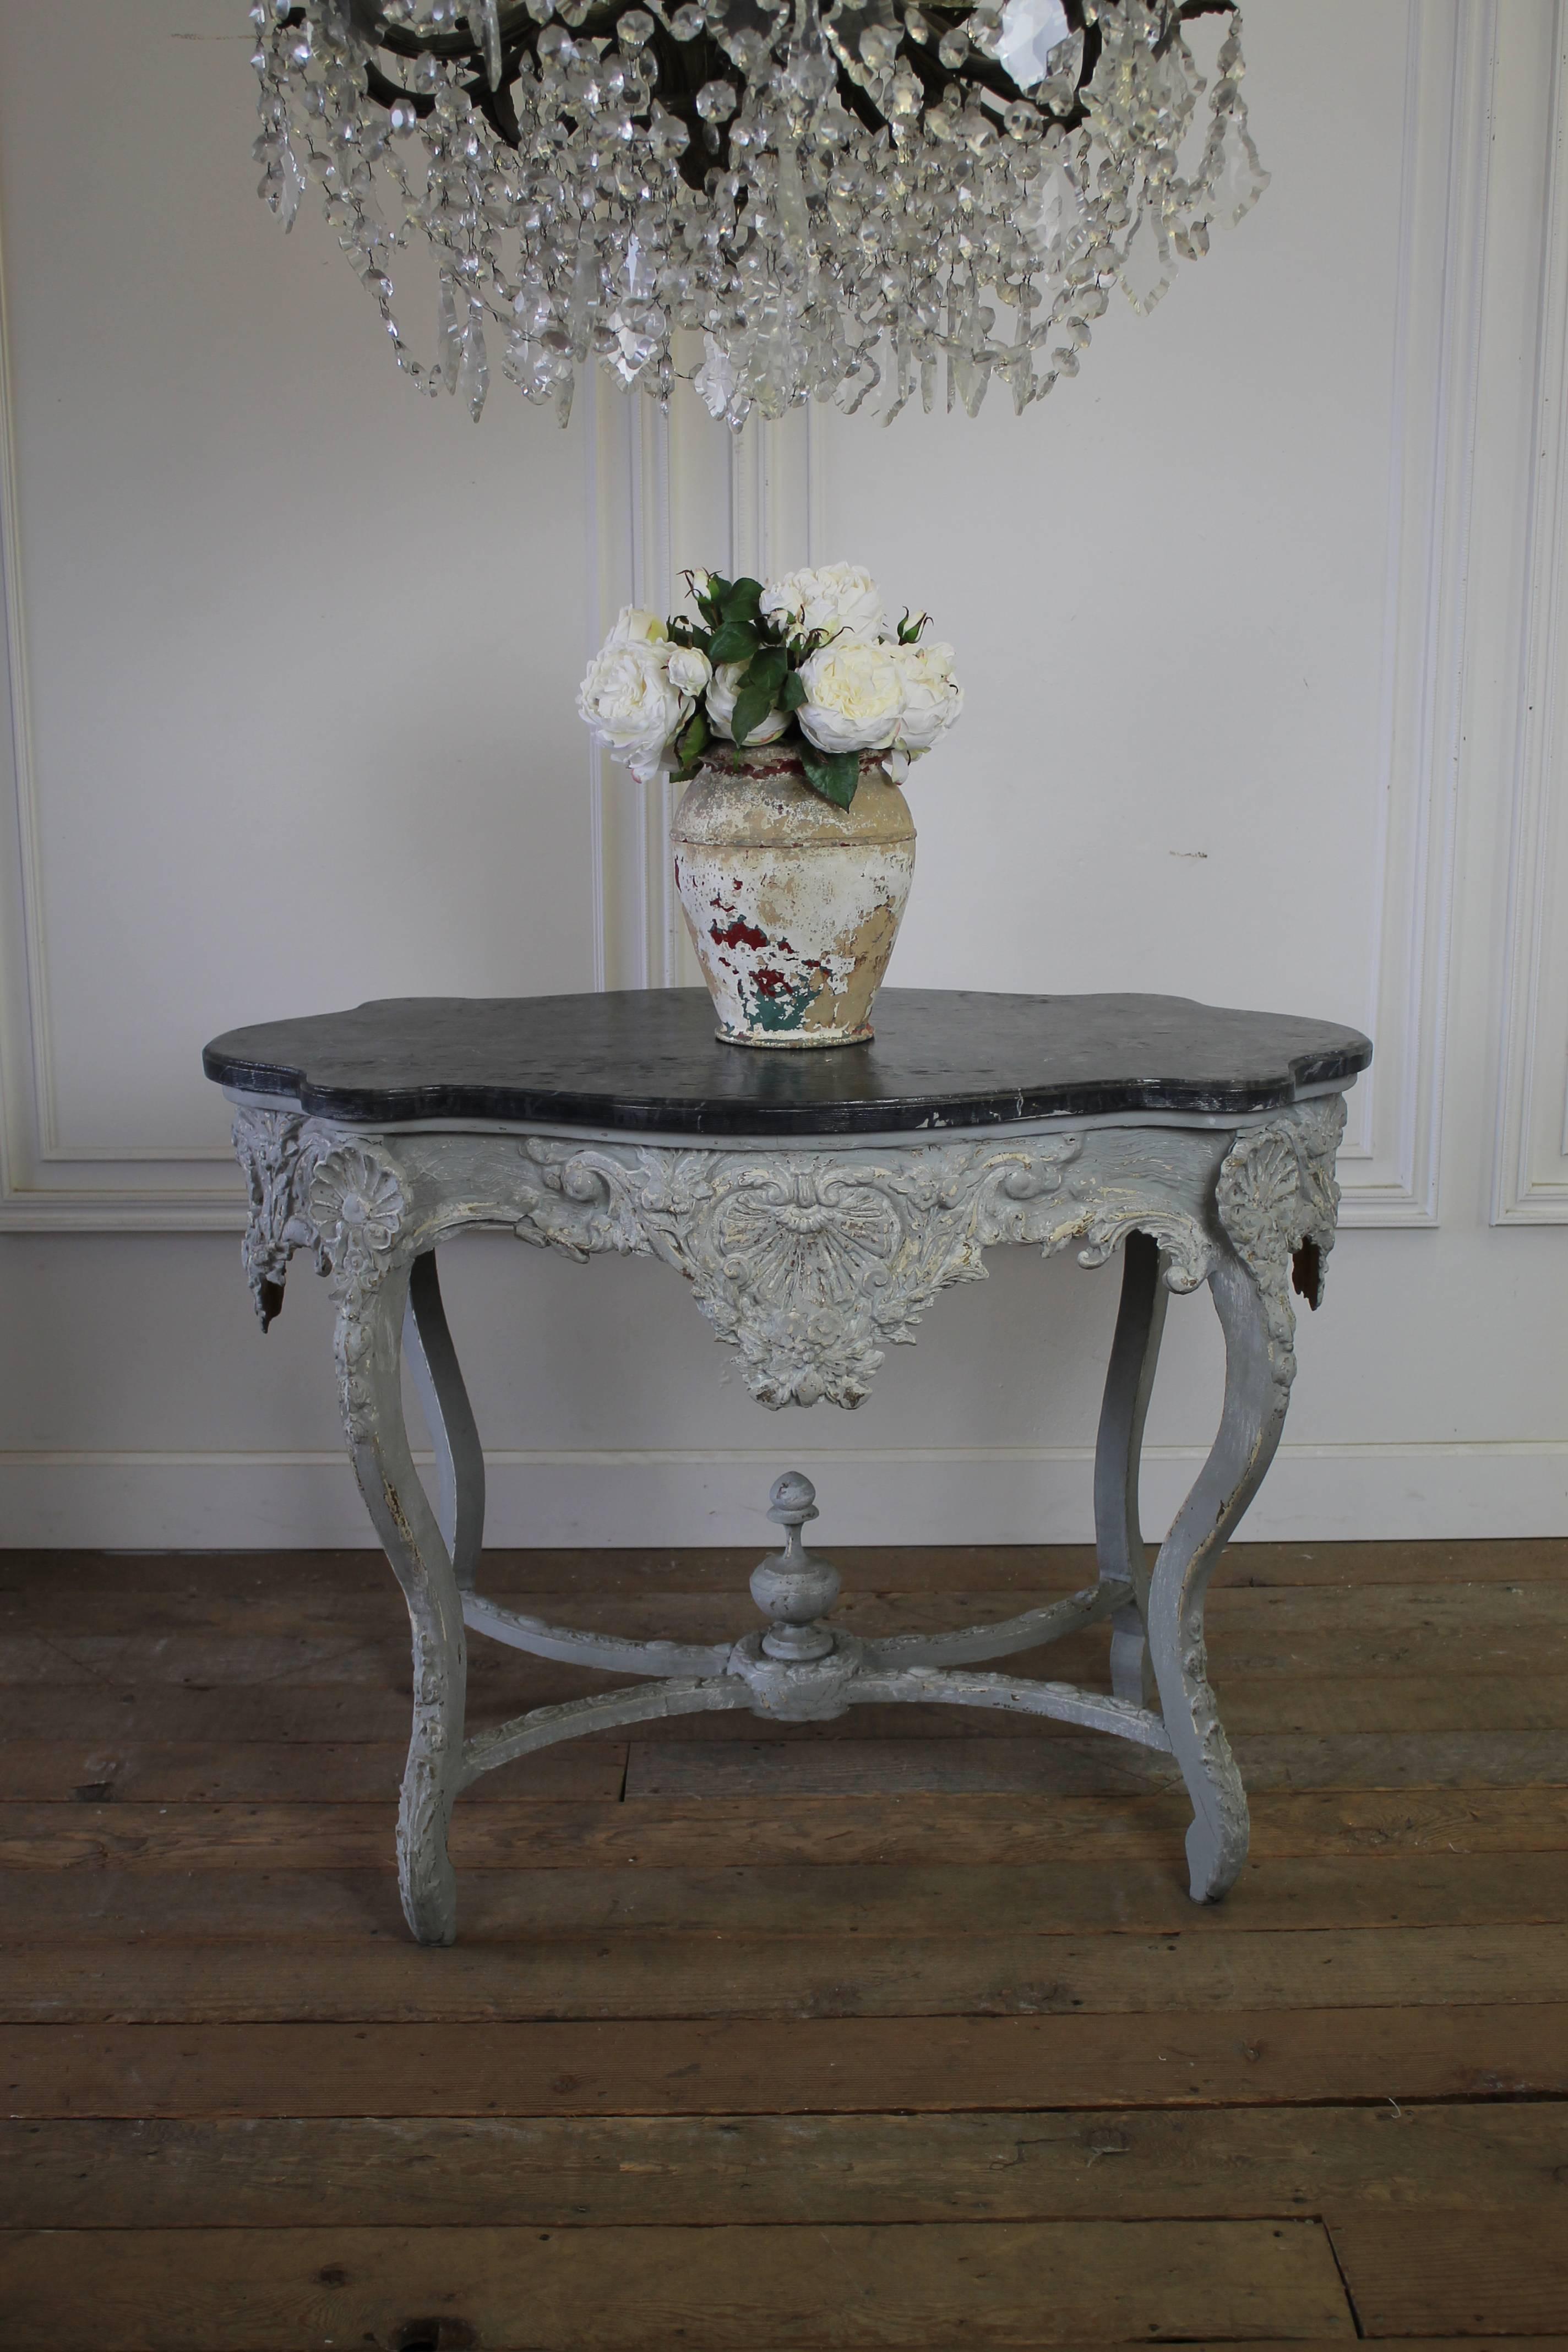 19th Century Painted and Carved Center Table with a faux marble painted top.  The base is painted in a pretty grey color with distressed areas, and aged patina.  The base is wood carved with gesso.  The table is sturdy, ready for use.
Measures: 45